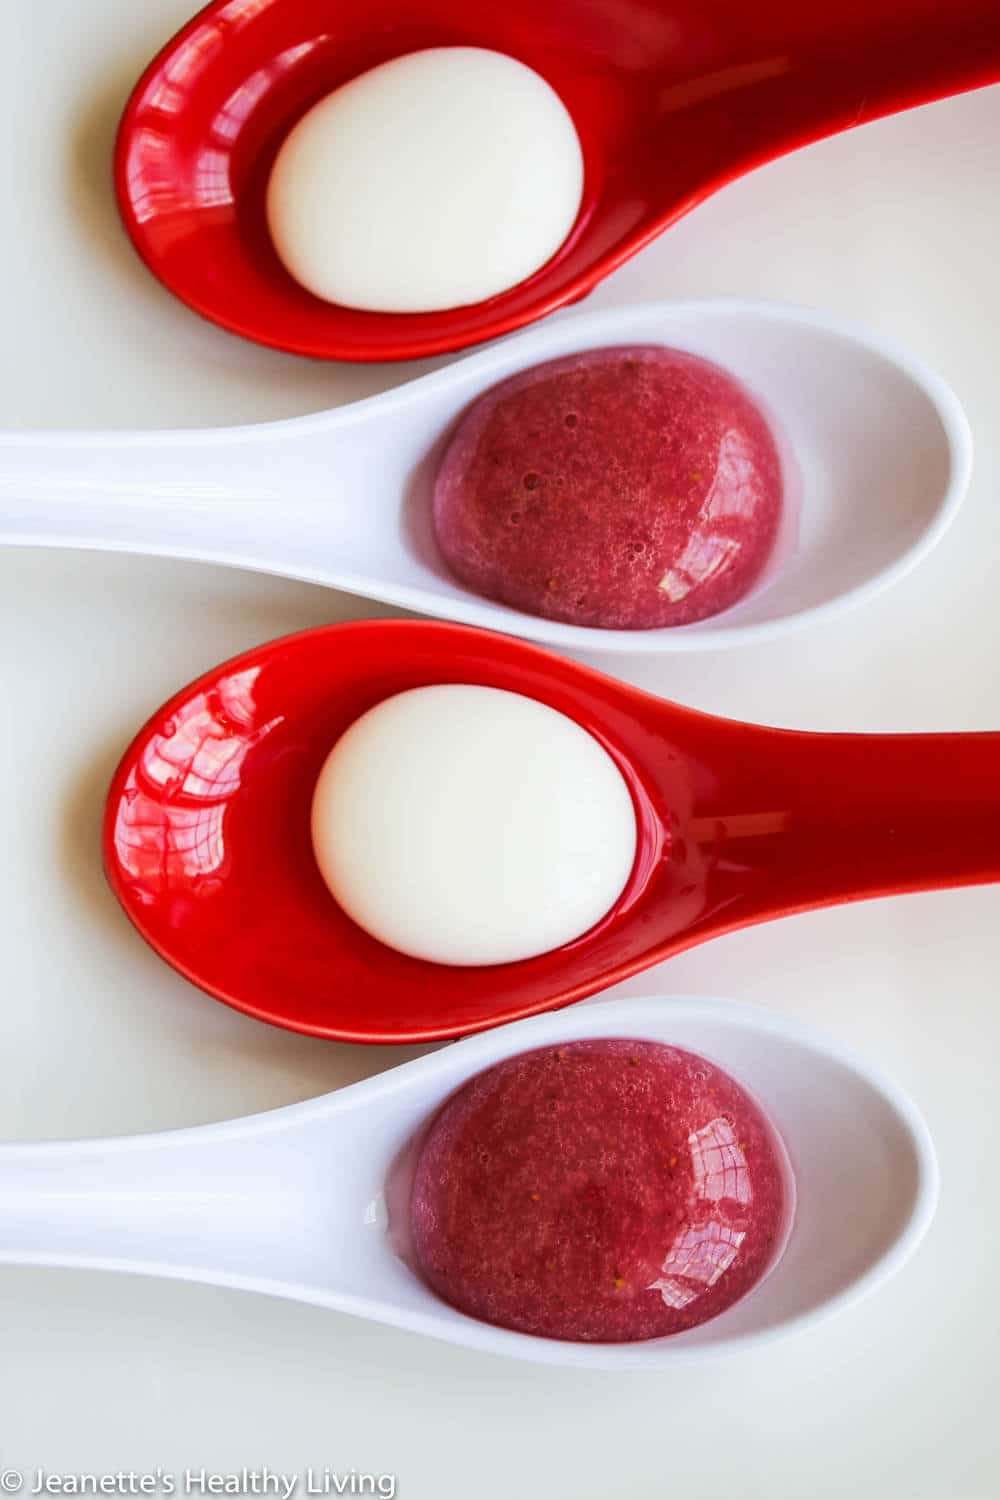 Strawberry and  Yogurt Spheres - using molecular gastronomy to help people with dysphagia